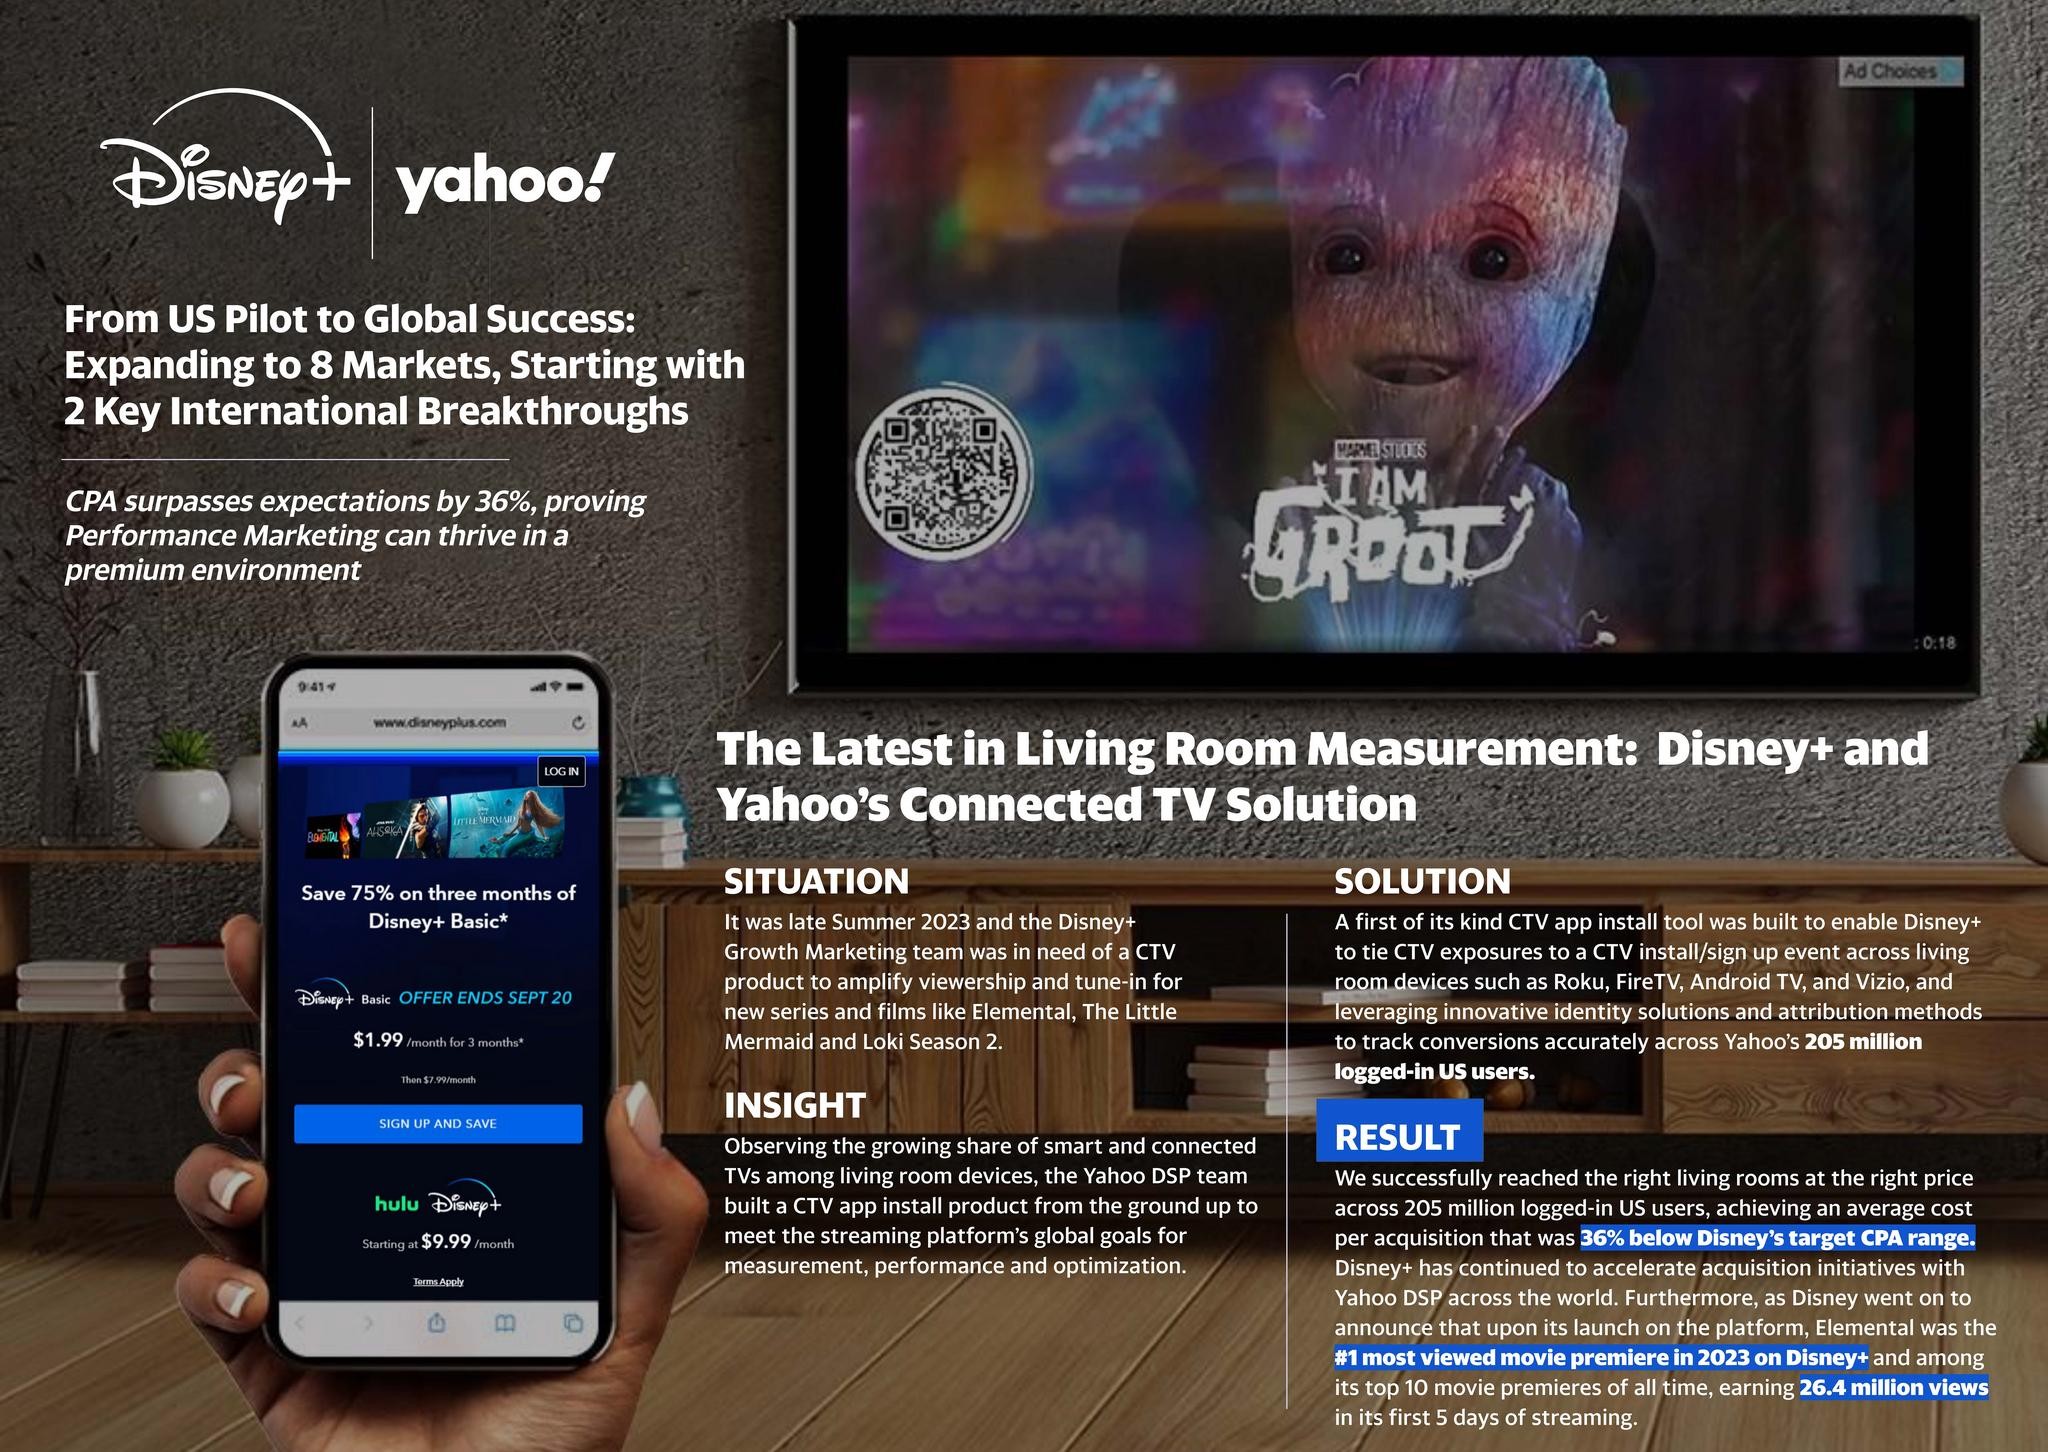 The Latest in Living Room Measurement: Disney+ and Yahoo’s Connected TV Solution